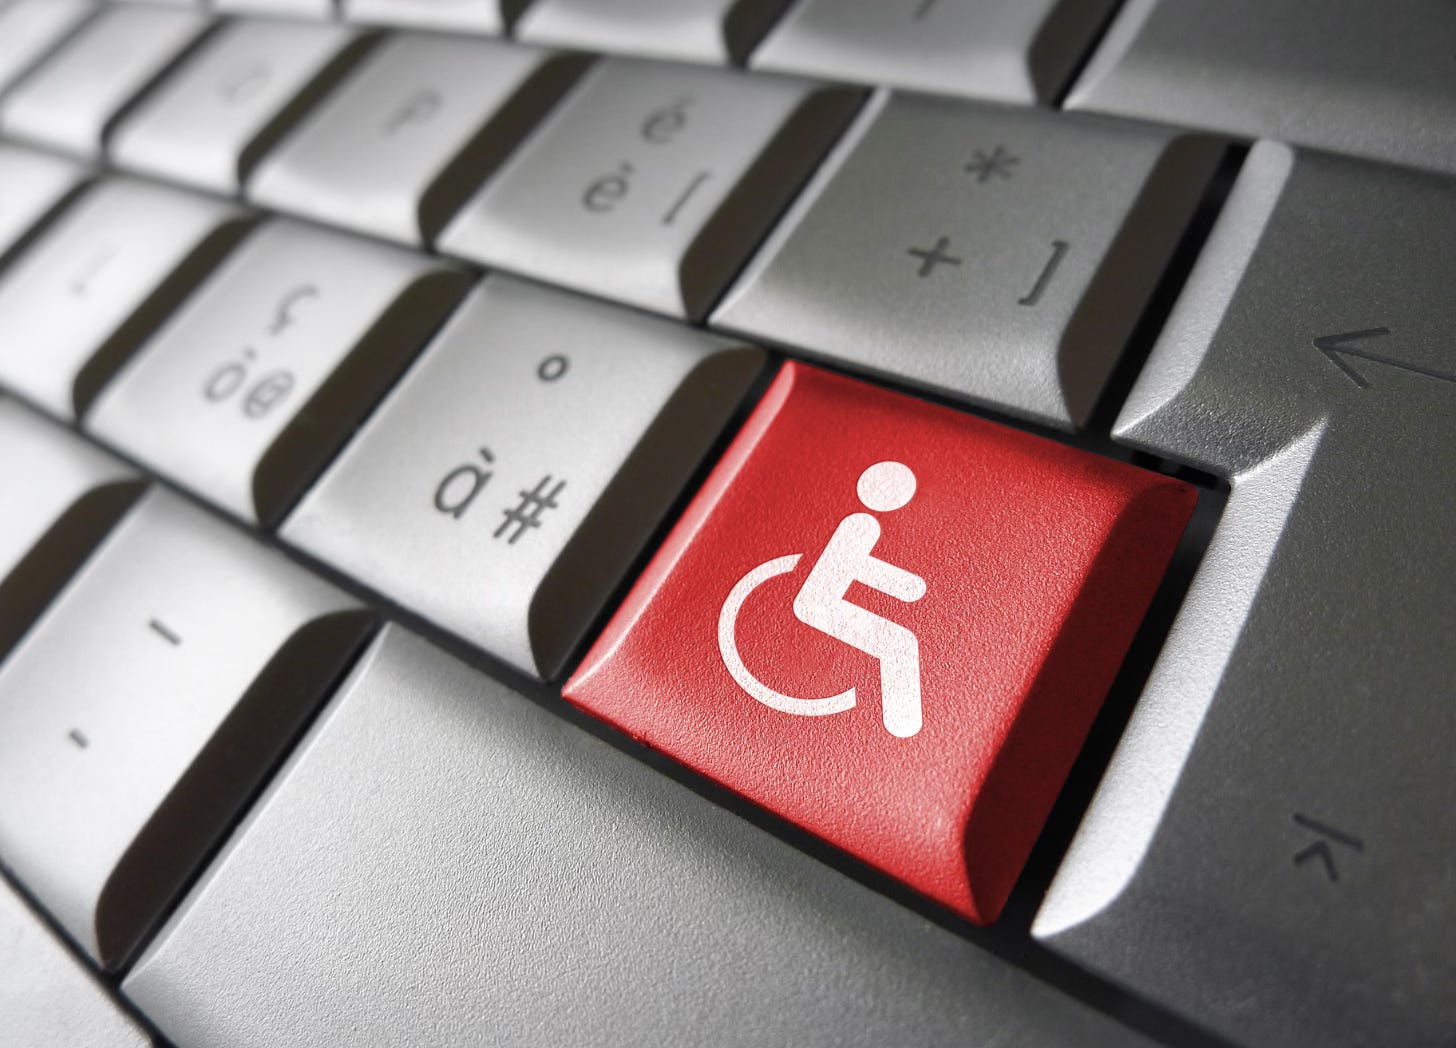 Closeup of computer keyboard with a red key with a white wheelchair symbol